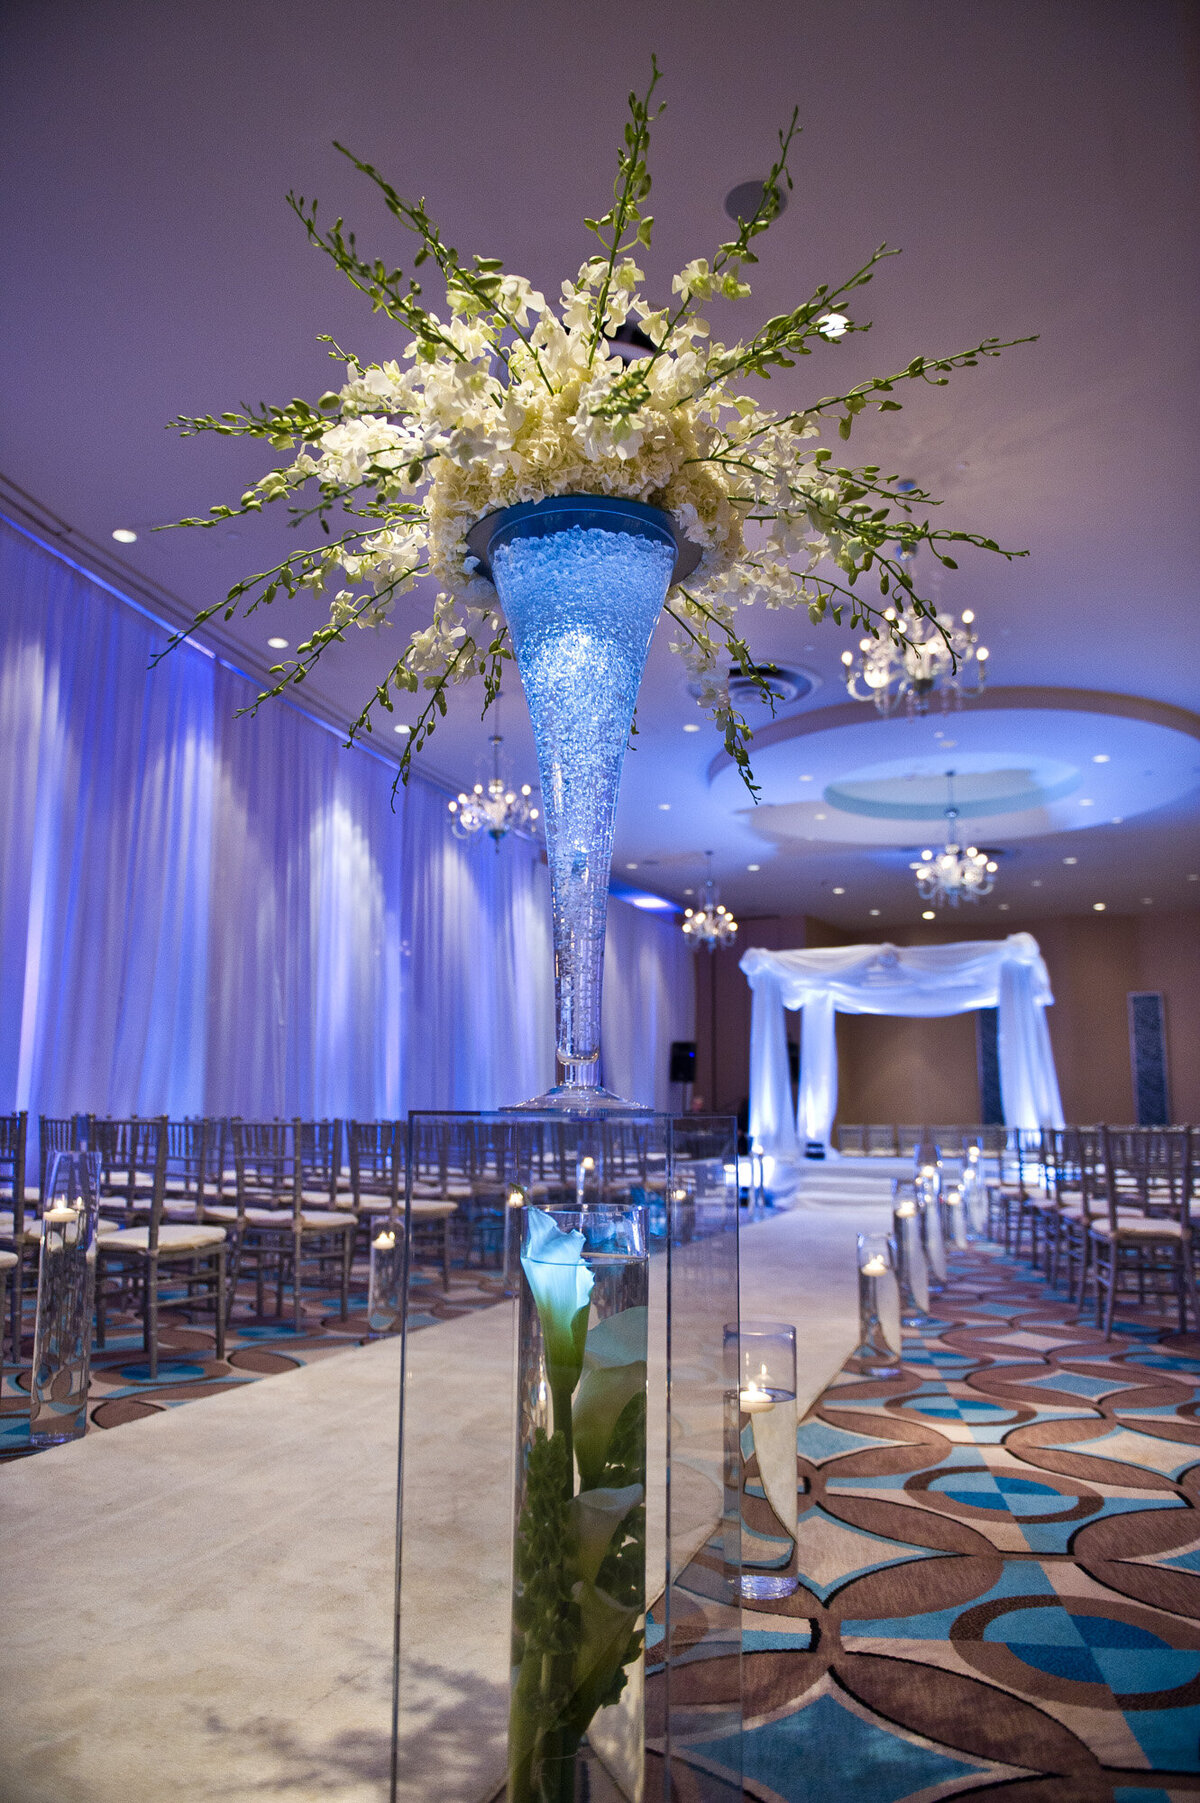 indoor wedding ceremony site with chairs and elegant drapings